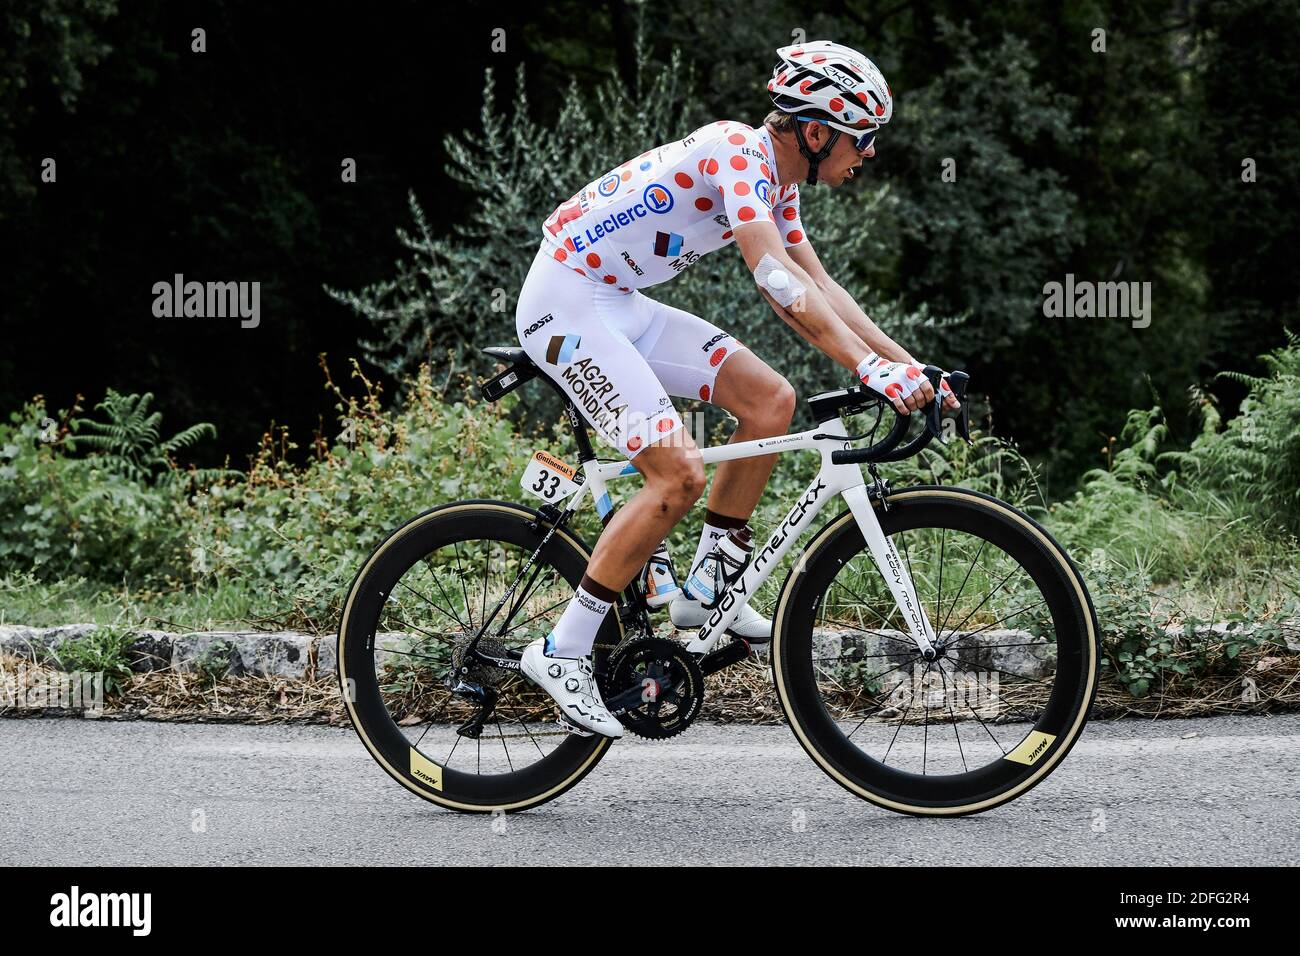 Handout. Benoit COSNEFROY (AG2R LA MONDIALE) during the 3rd stage of the  Tour de France 2020, Nice - Sisteron, France on August 31, 2020. Photo by  Alex Broadway/ASO via ABACAPRESS.COM Stock Photo - Alamy